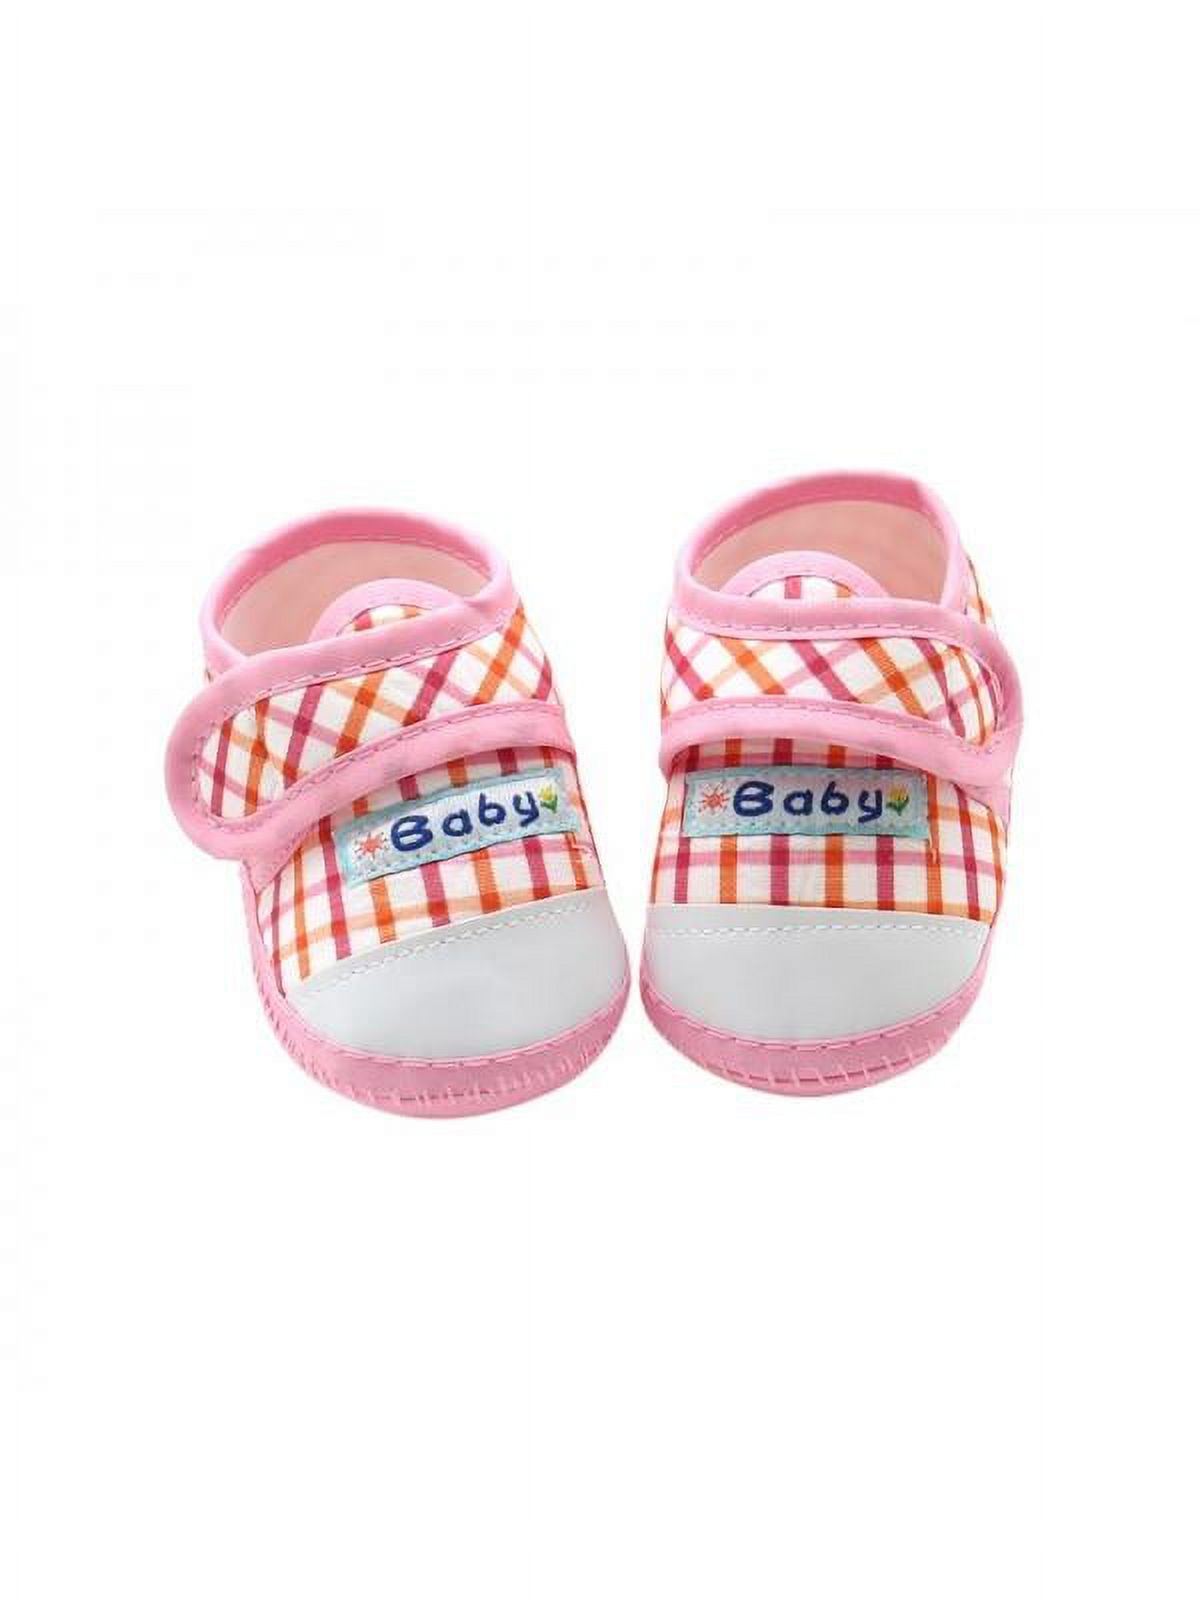 Baby Toddler Girl Boy Shoes Sneakers Soft Sole First Walker - image 3 of 8